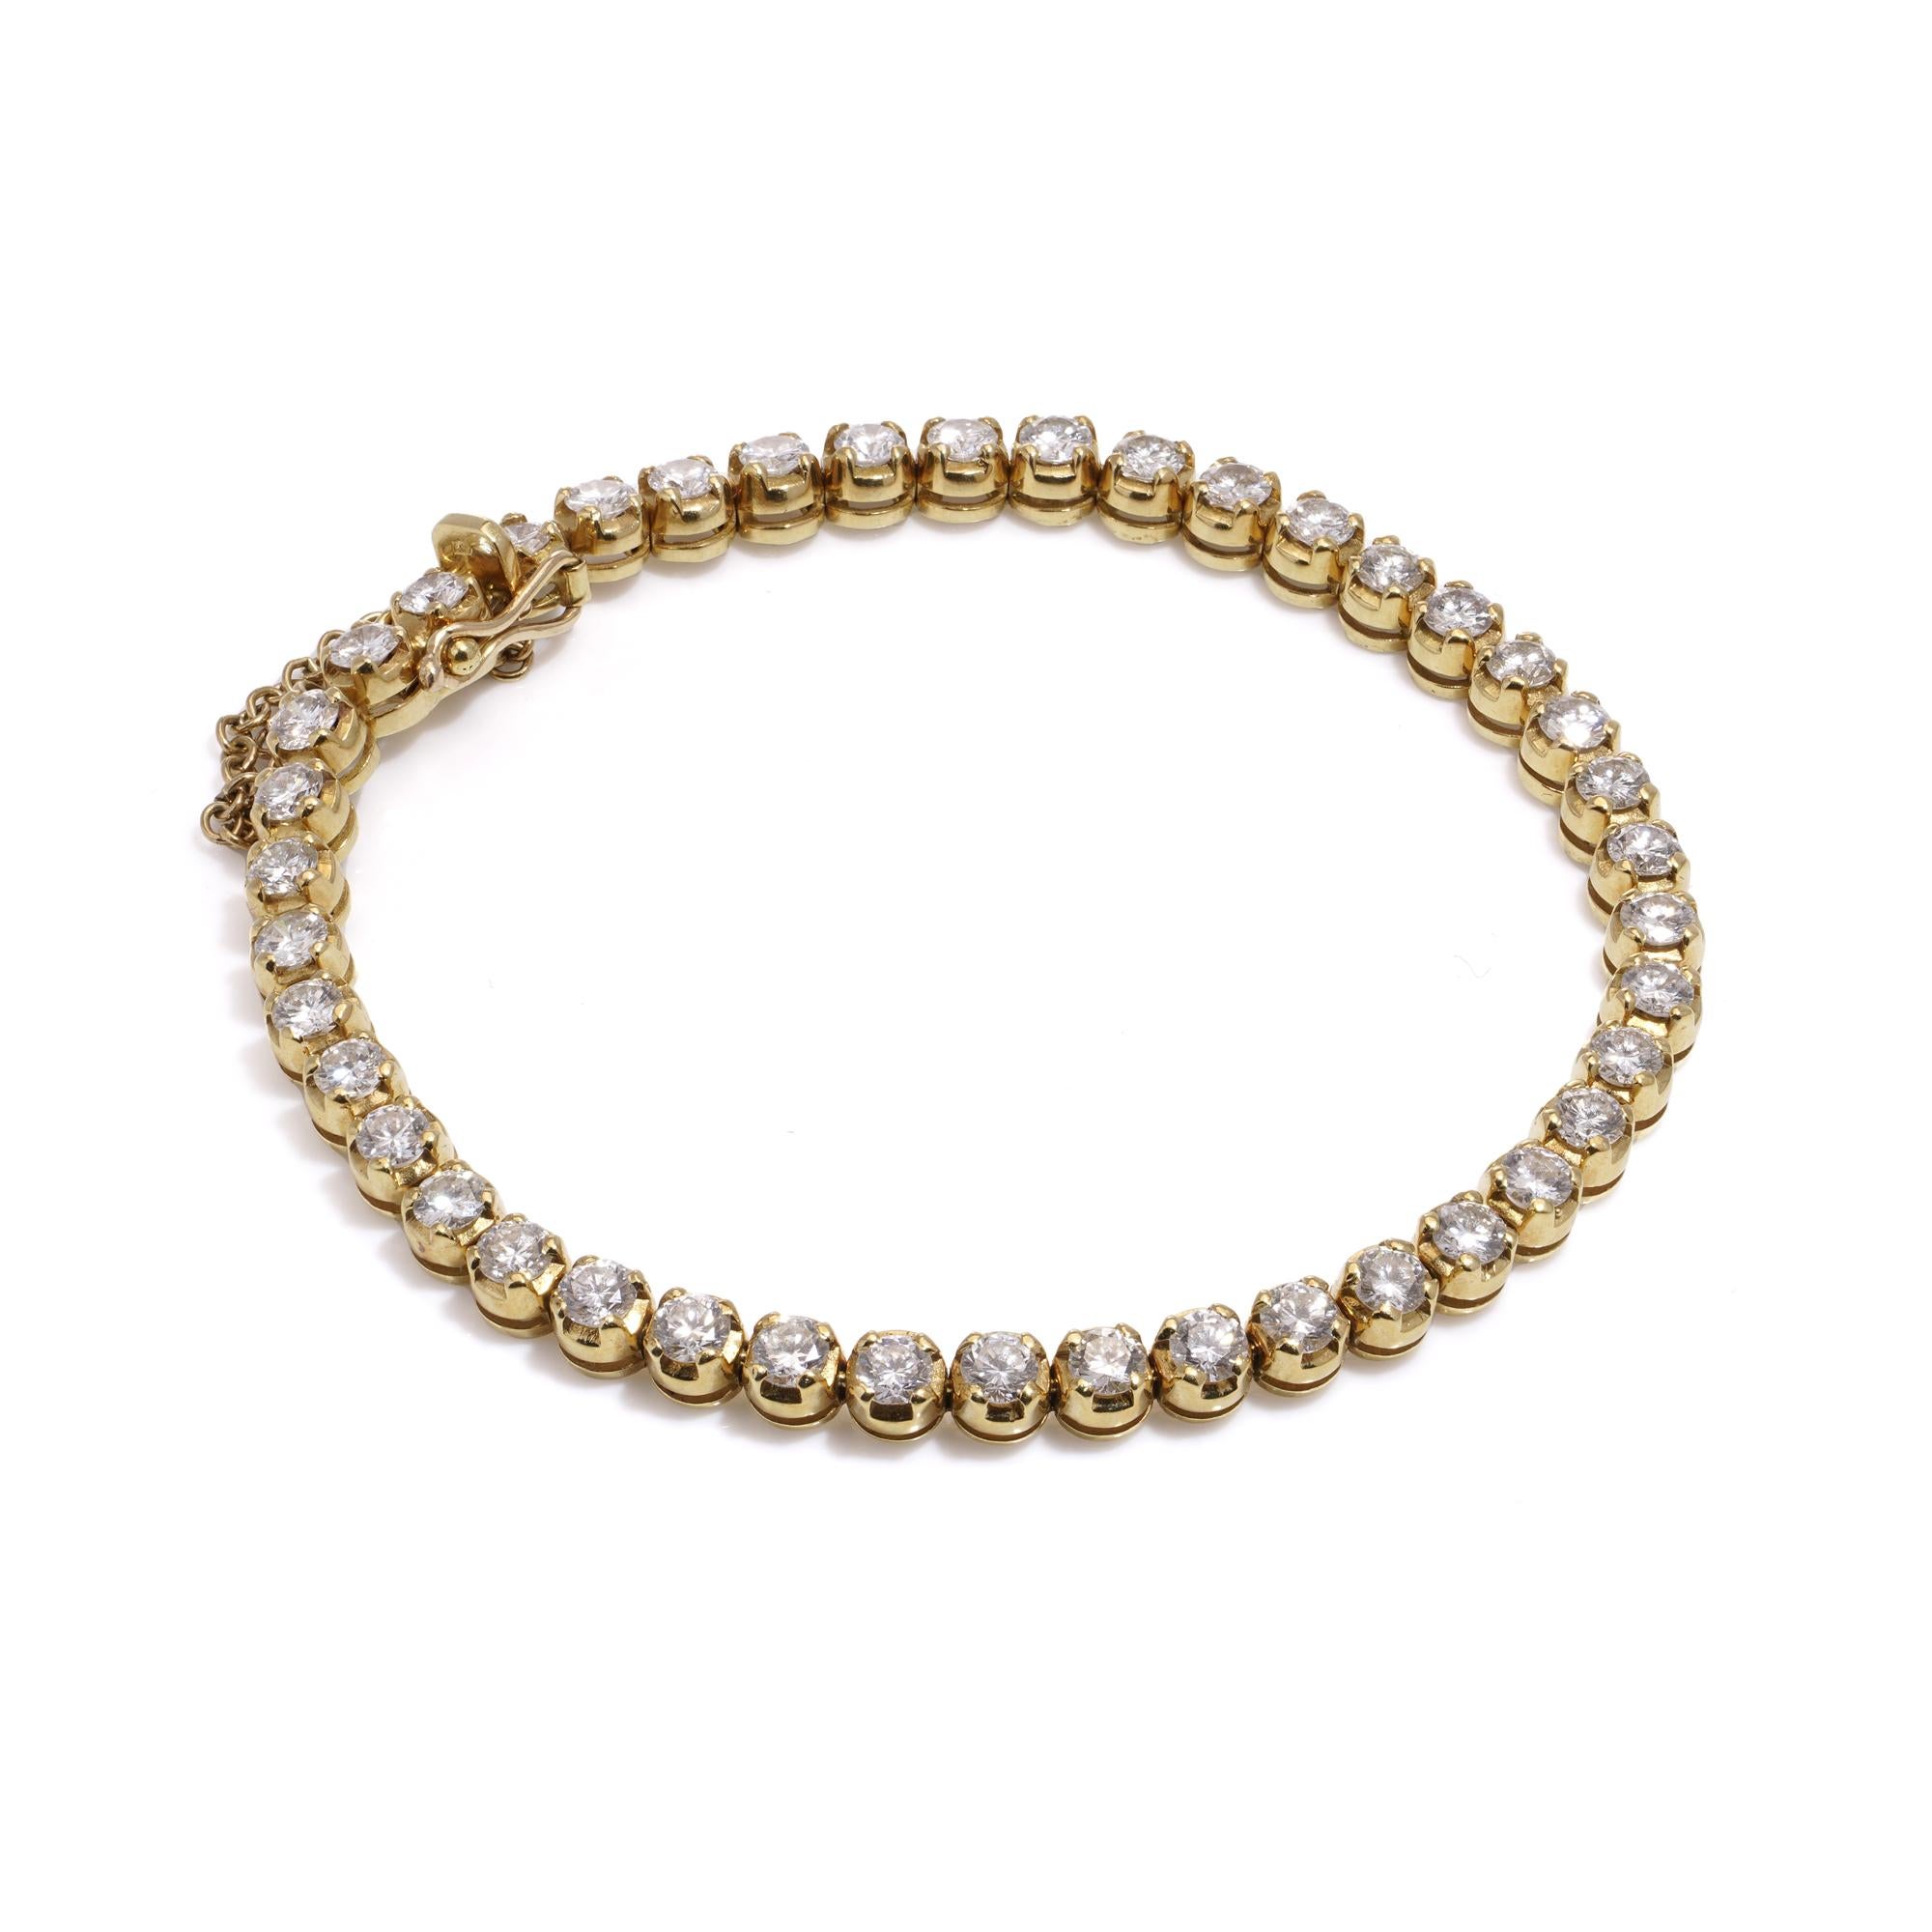 18kt yellow gold tennis bracelet set with 6.30 carats of round brilliant diamonds. 
Hallmarked with 750 mark, maker's mark. 
Made after 2000s 

Dimensions:
Bracelet size: L 
Weight: 16.00 grams

Diamonds - 
Cut: Round brilliant 
Quantity of stones: